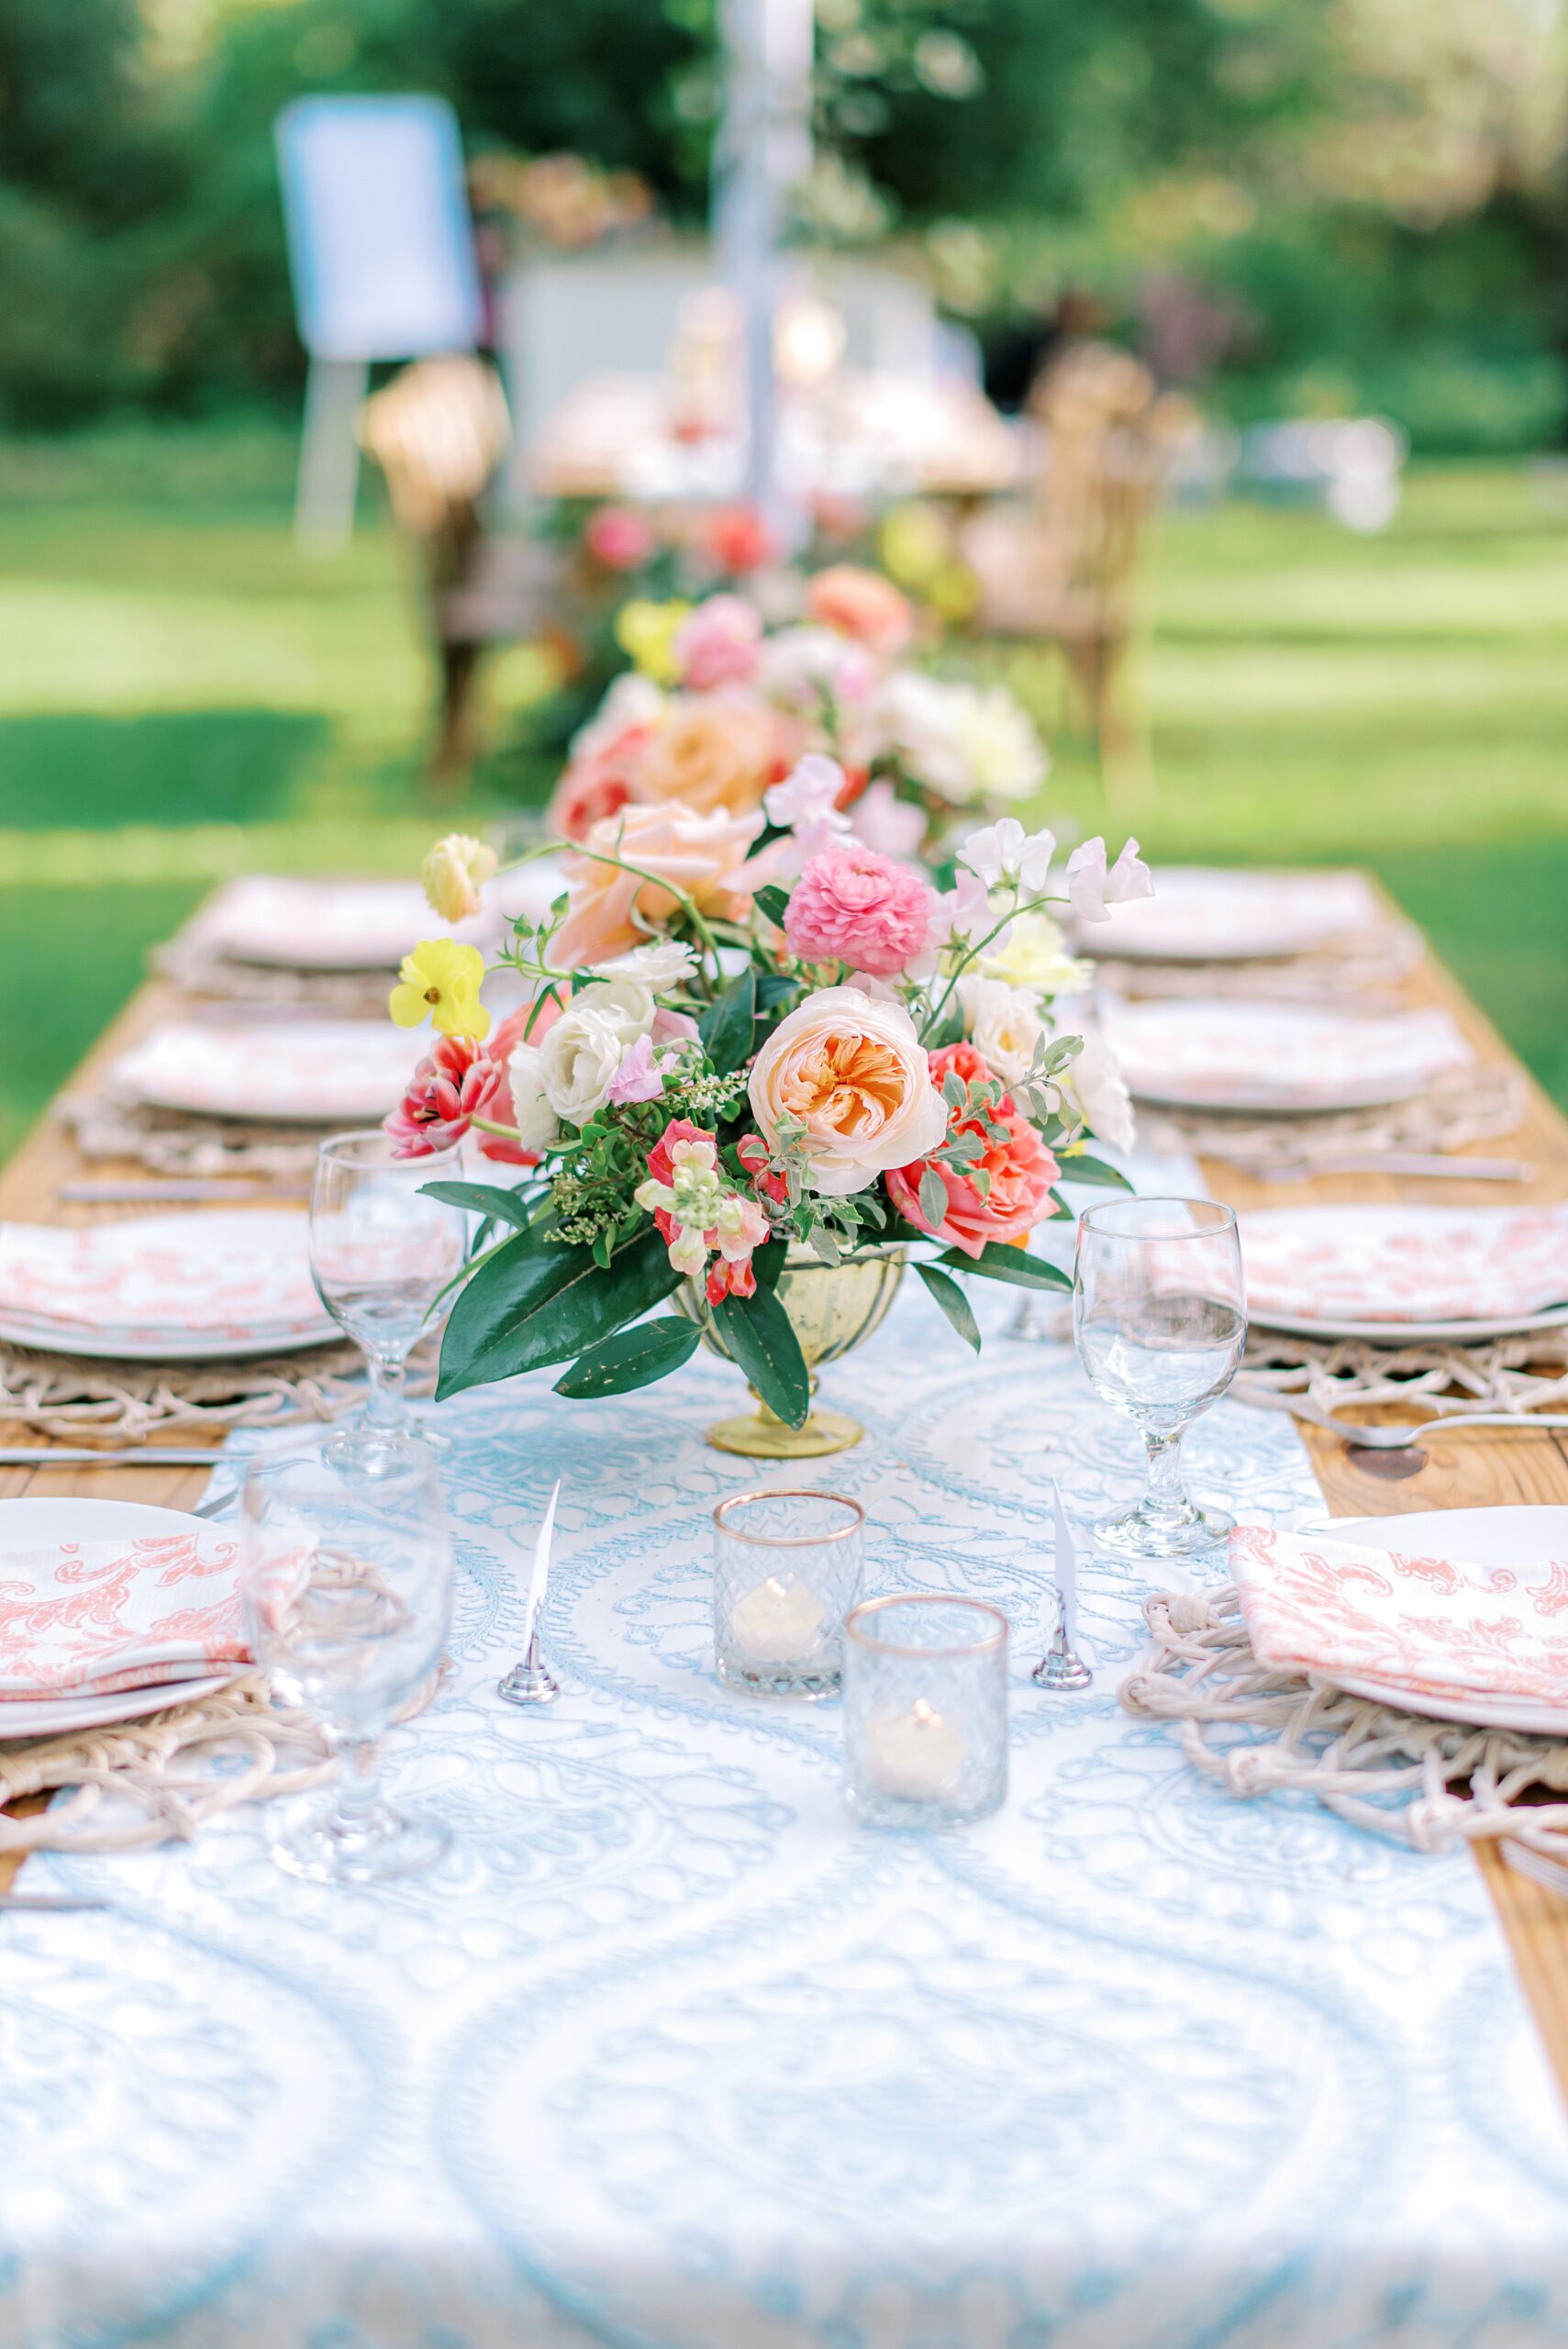 Details of an outdoor reception table setup at a unique wedding venues in charlotte nc